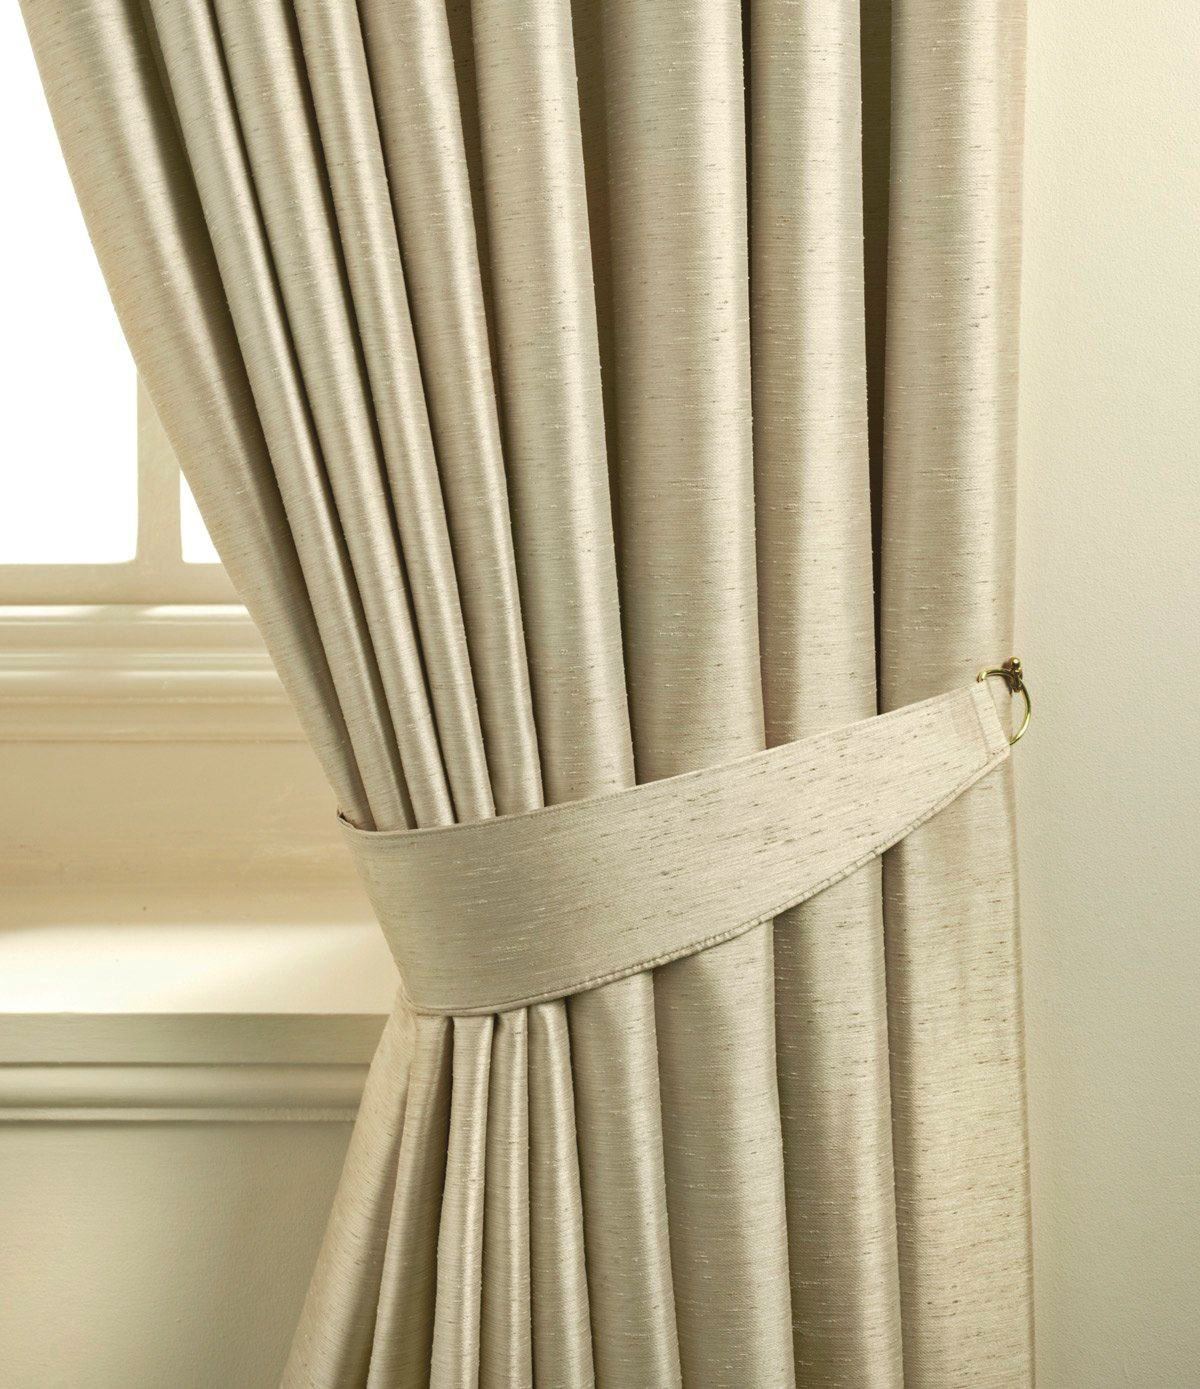 Where To Position Curtain Tie Backs